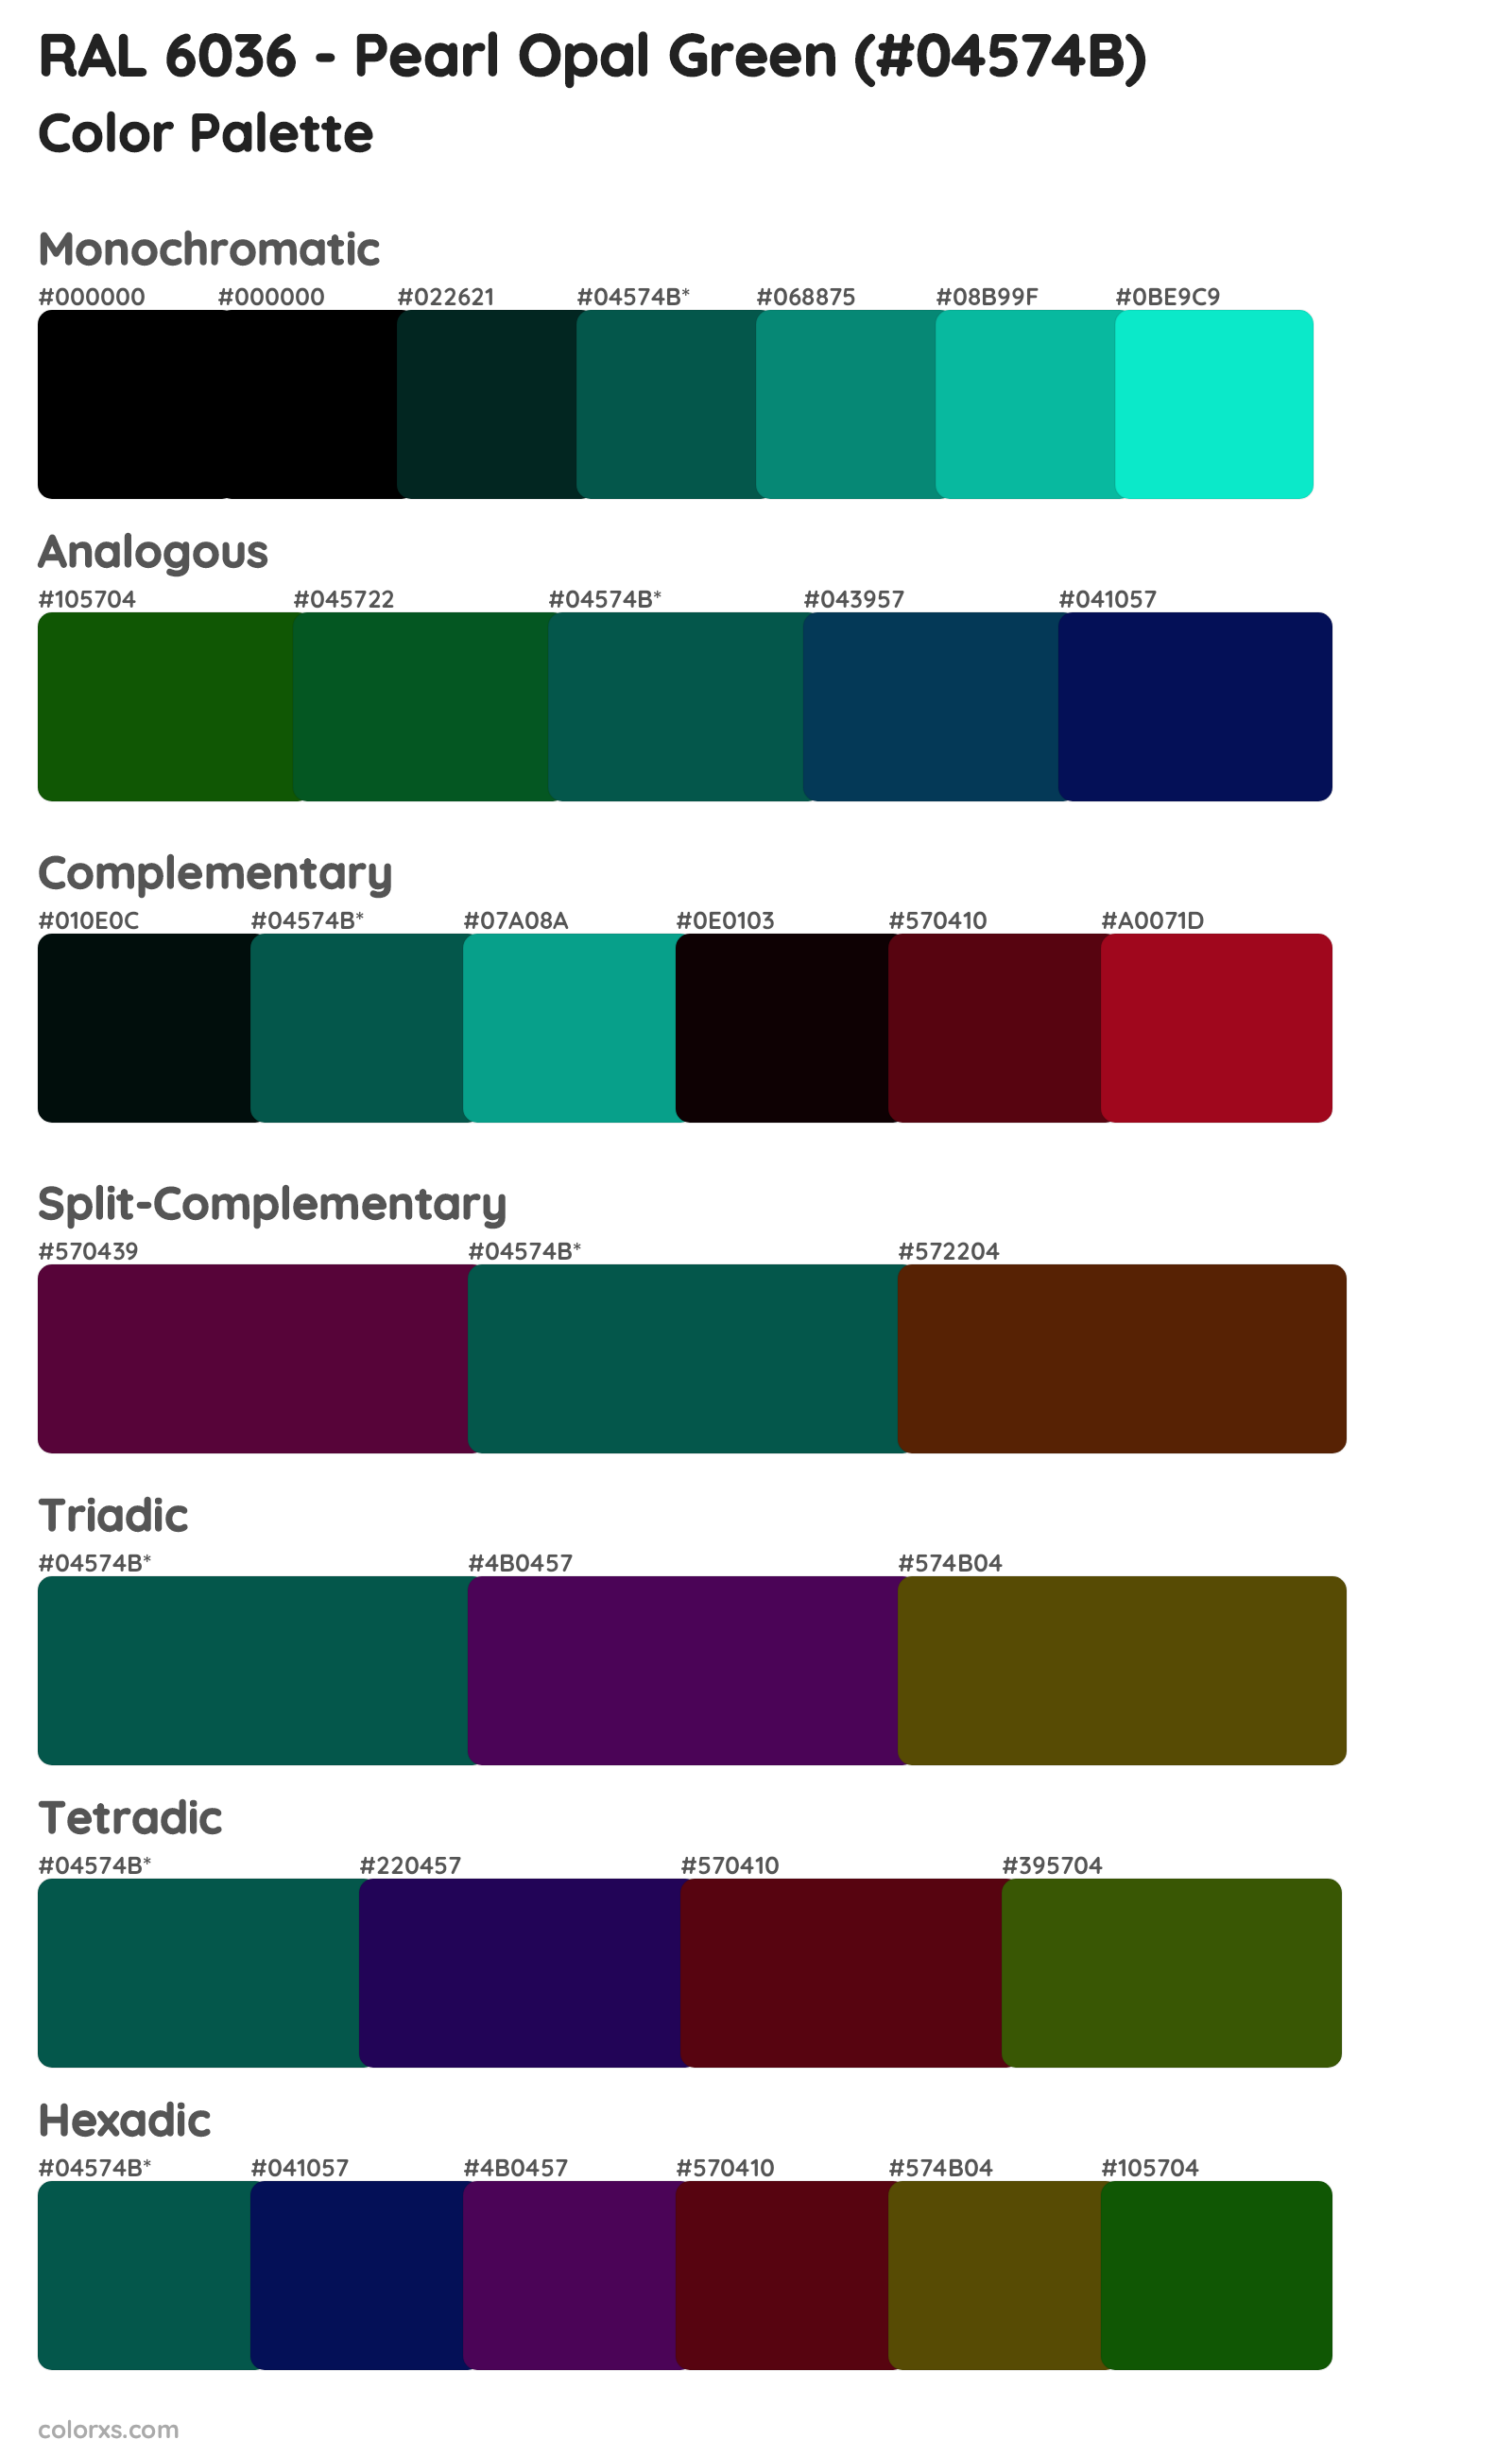 RAL 6036 - Pearl Opal Green Color Scheme Palettes